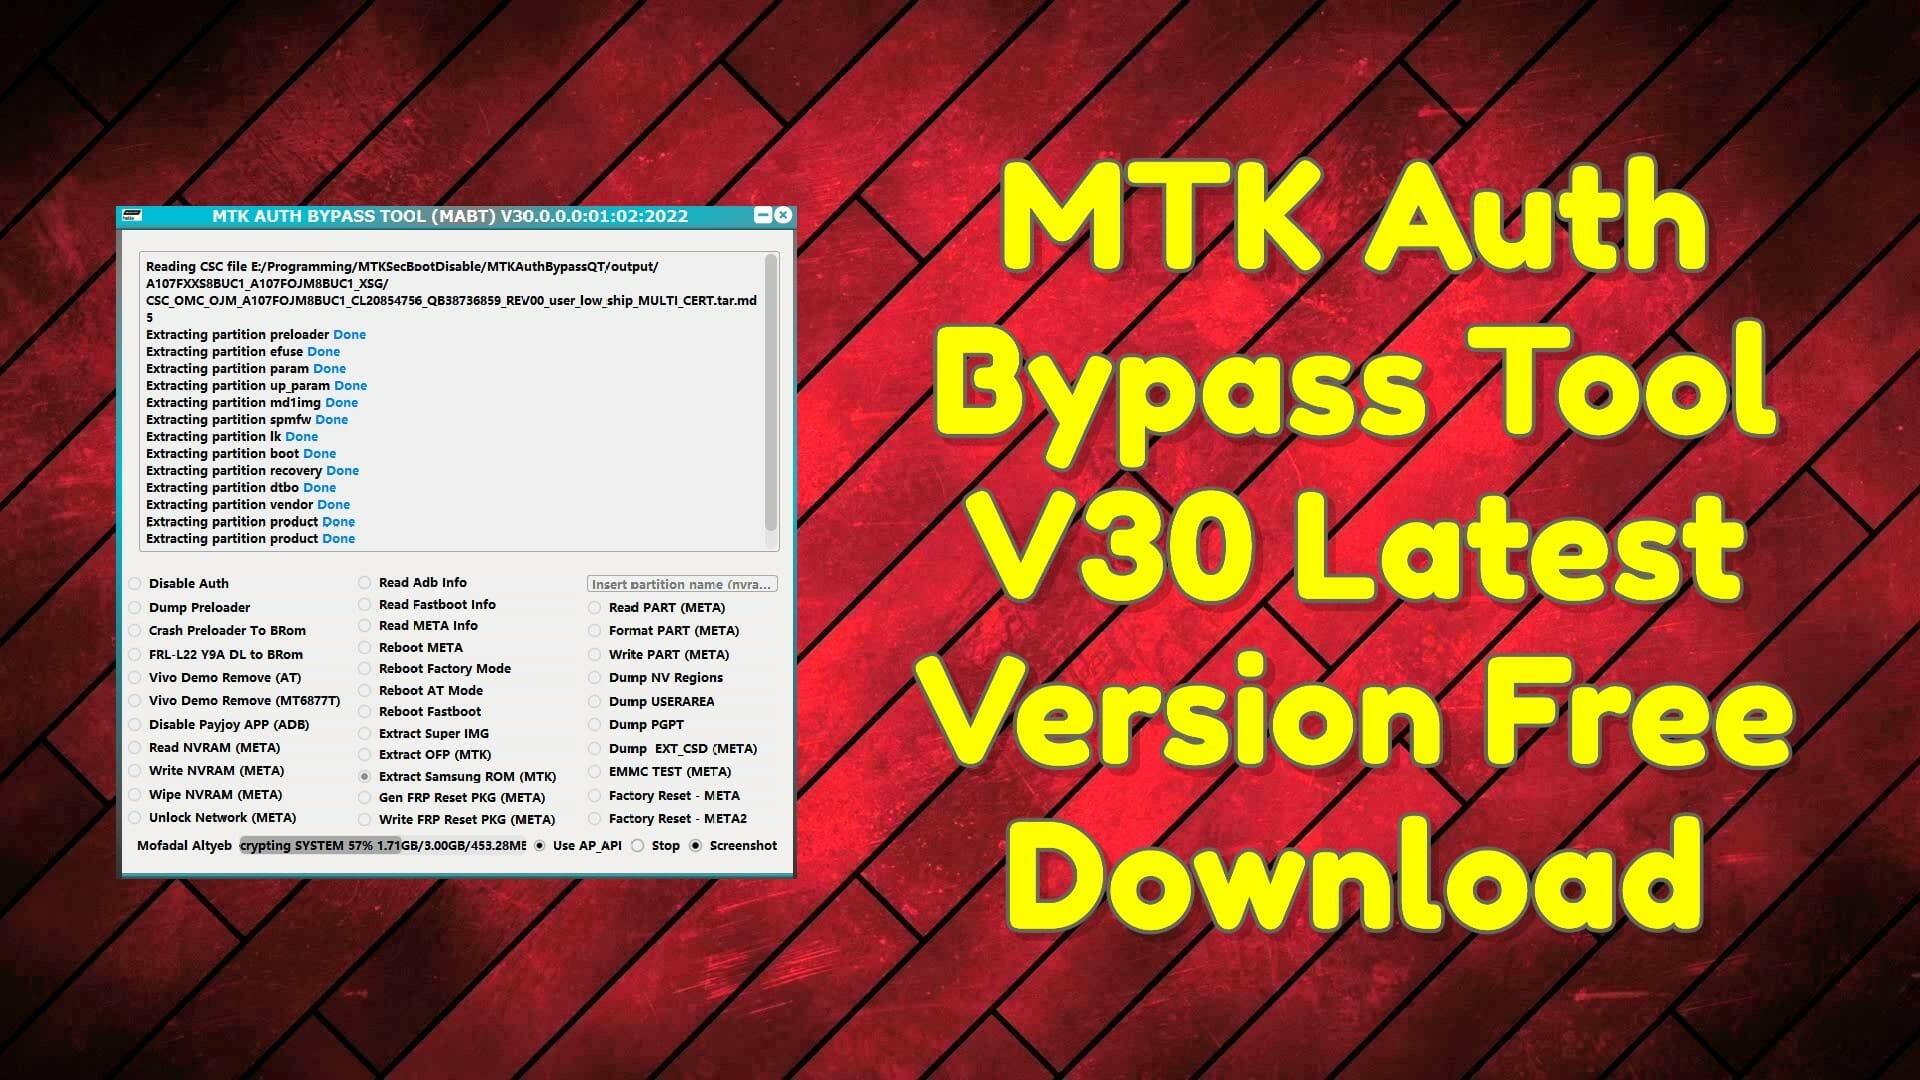 MTK Auth Bypass Tool V30 Latest Version Free Download